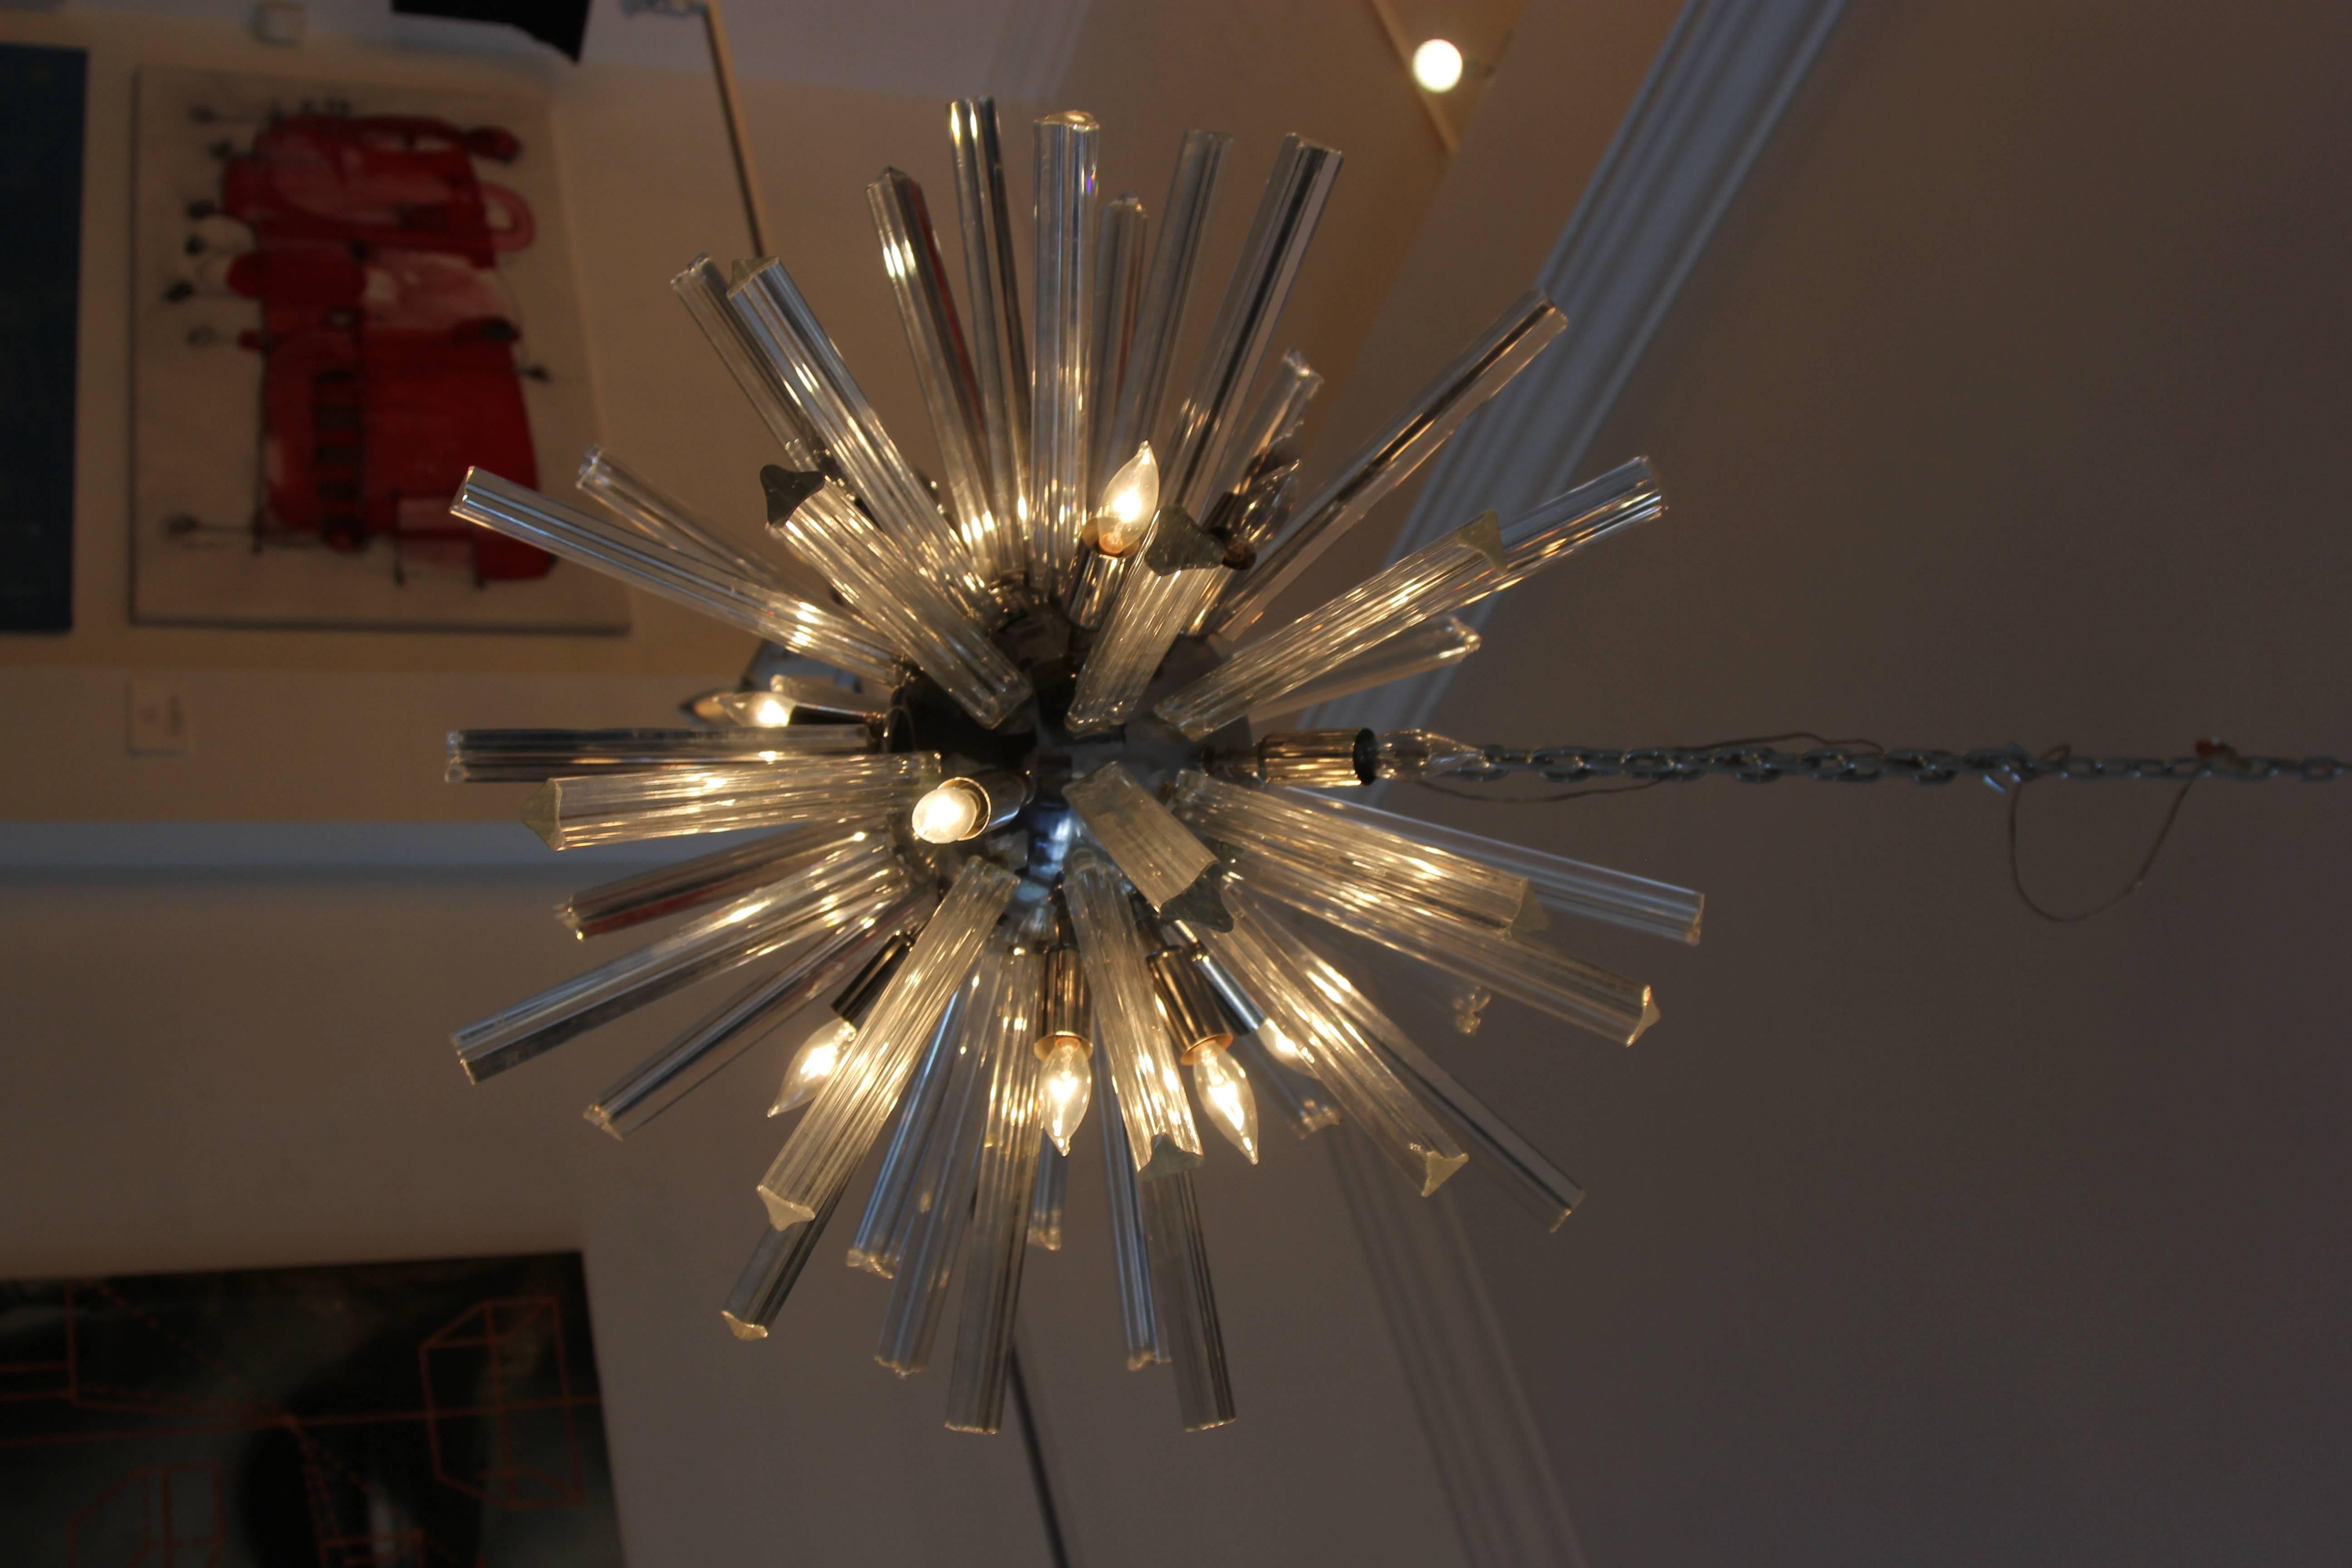 Incredible glass and chrome ball Sputnik Mid-Century chandelier. Gives beautiful light, and a modern retro feel to any space. This is a true statement piece of lighting. Attributed to Cosack, Germany.